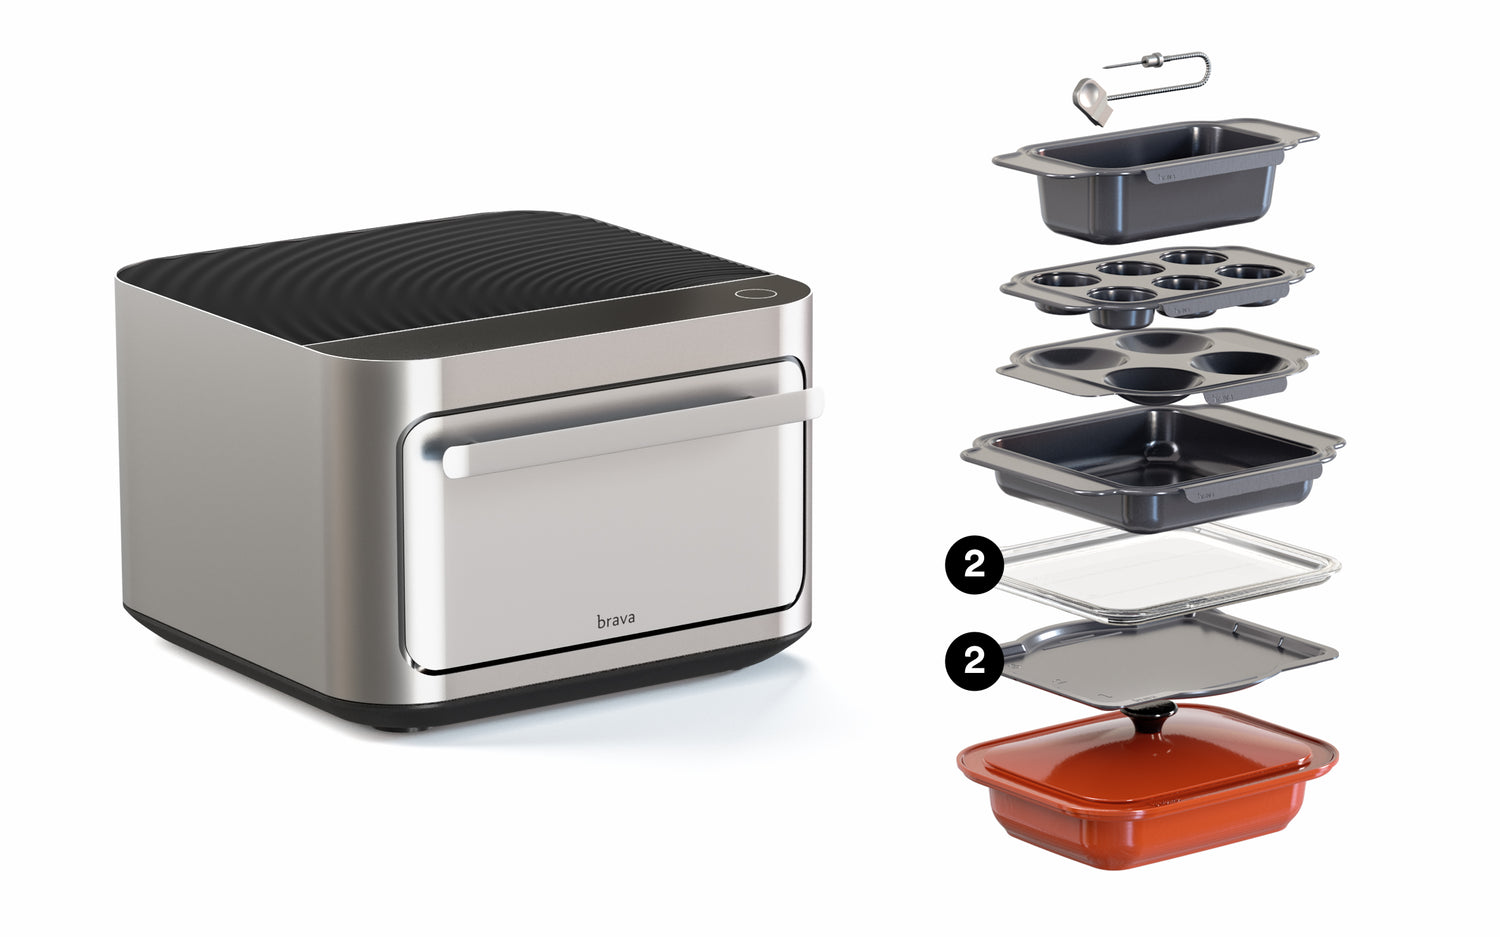 22 Best Kitchen Appliances For 2022 That You Must-Have As A Cook